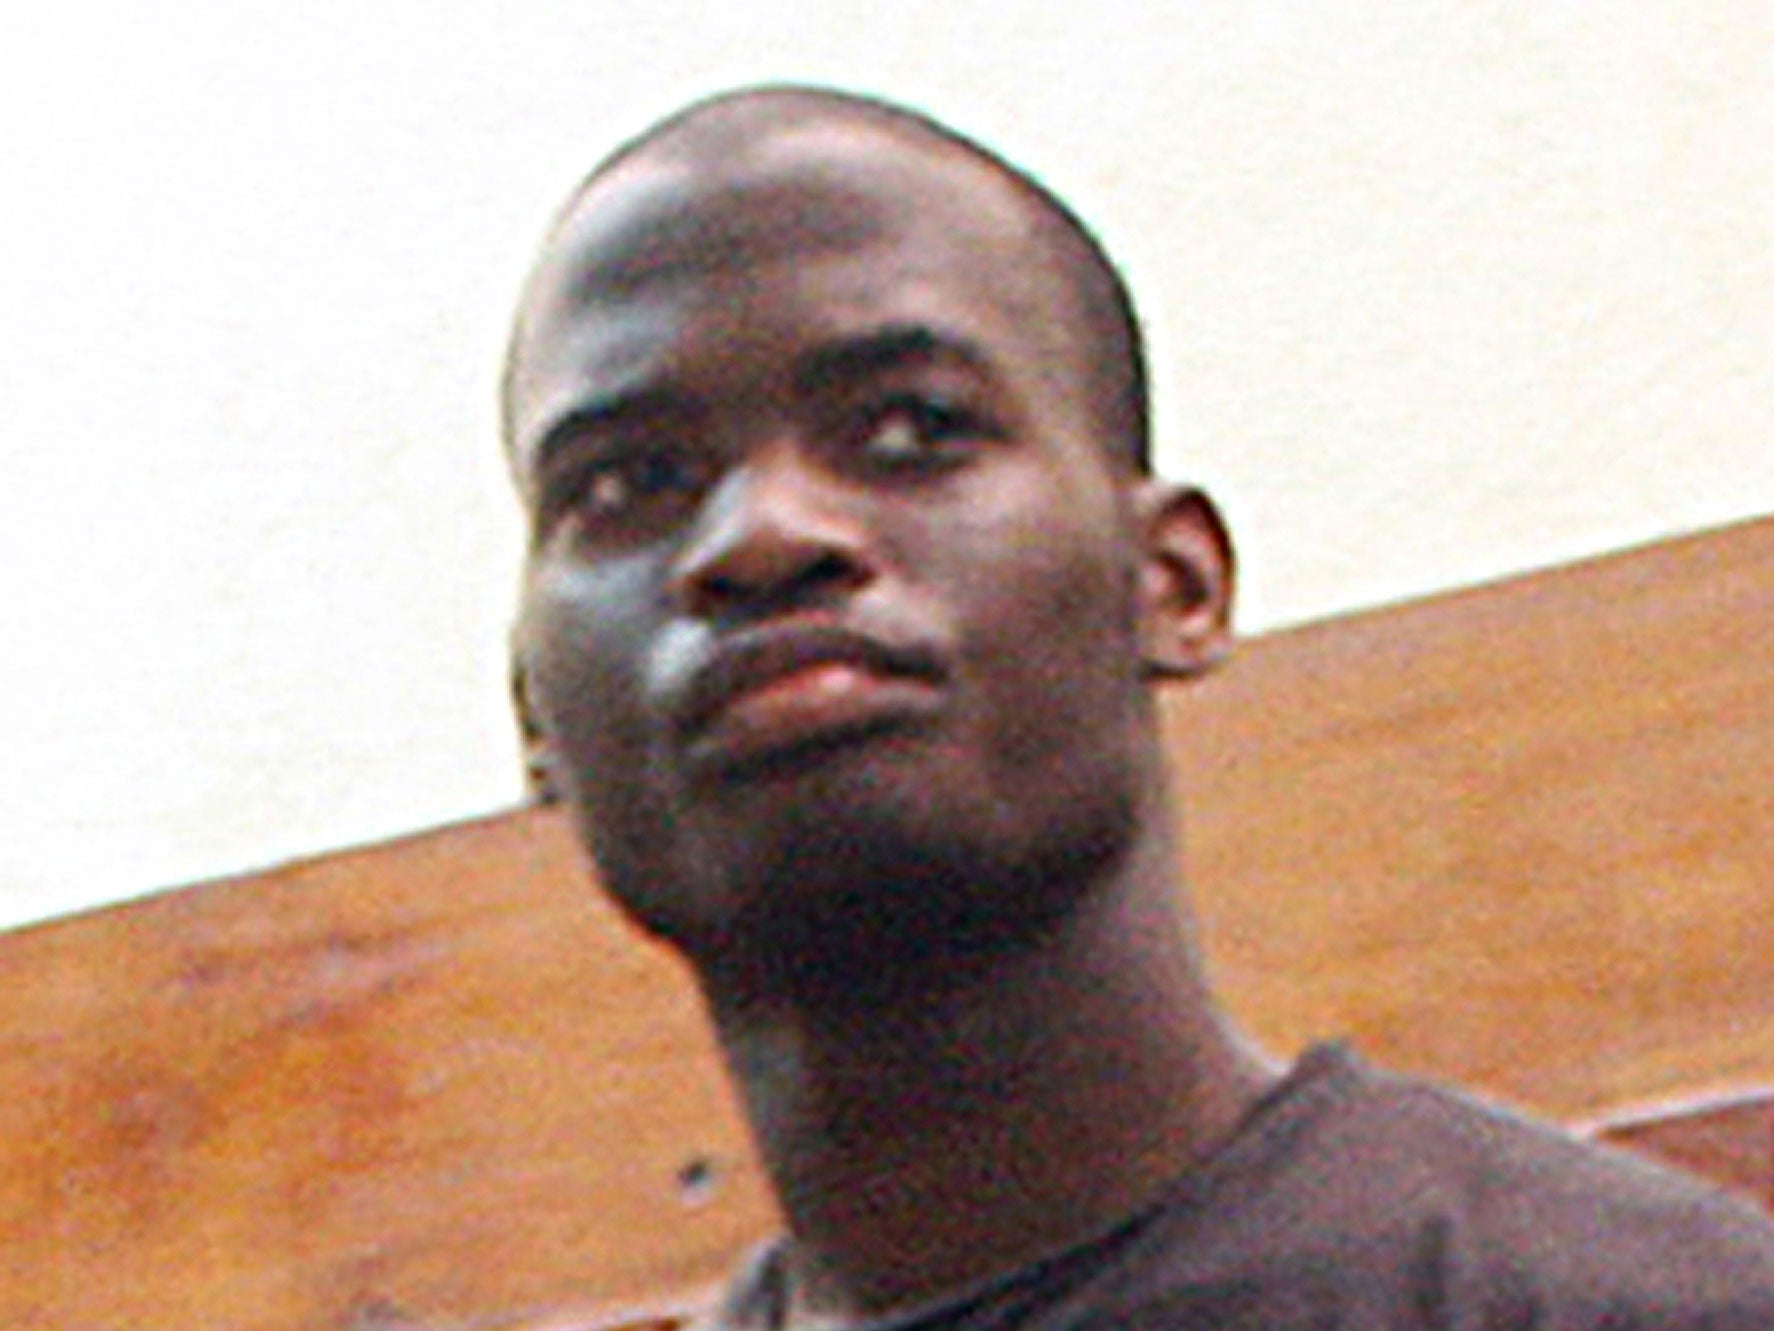 Adebolajo (pictured) is reportedly converting other inmates to extremism